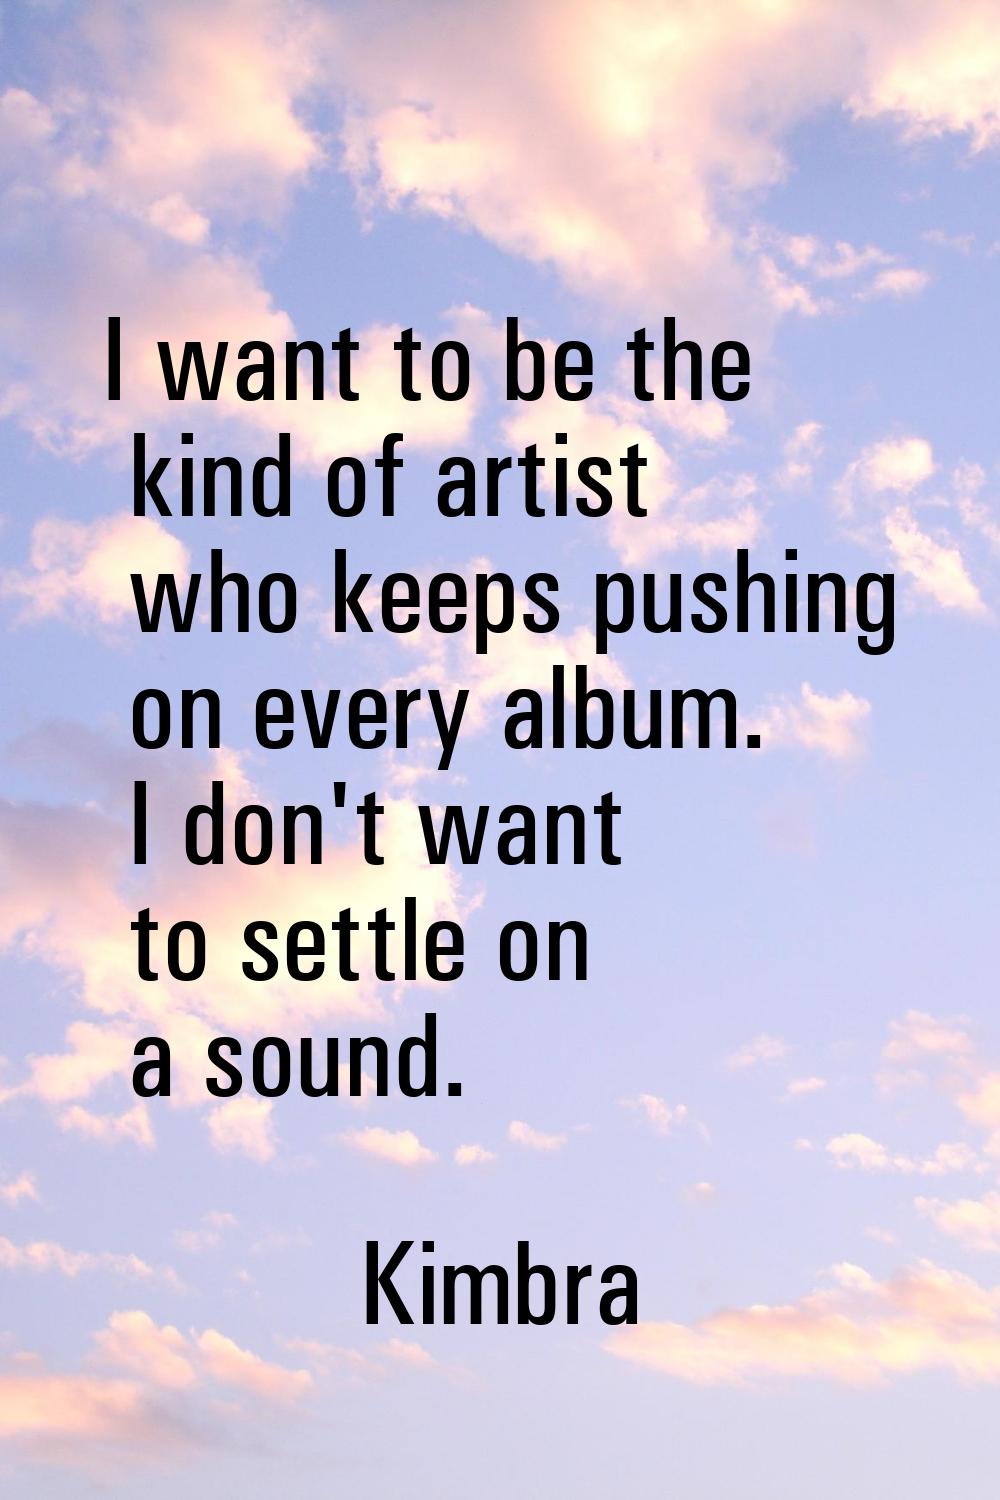 I want to be the kind of artist who keeps pushing on every album. I don't want to settle on a sound